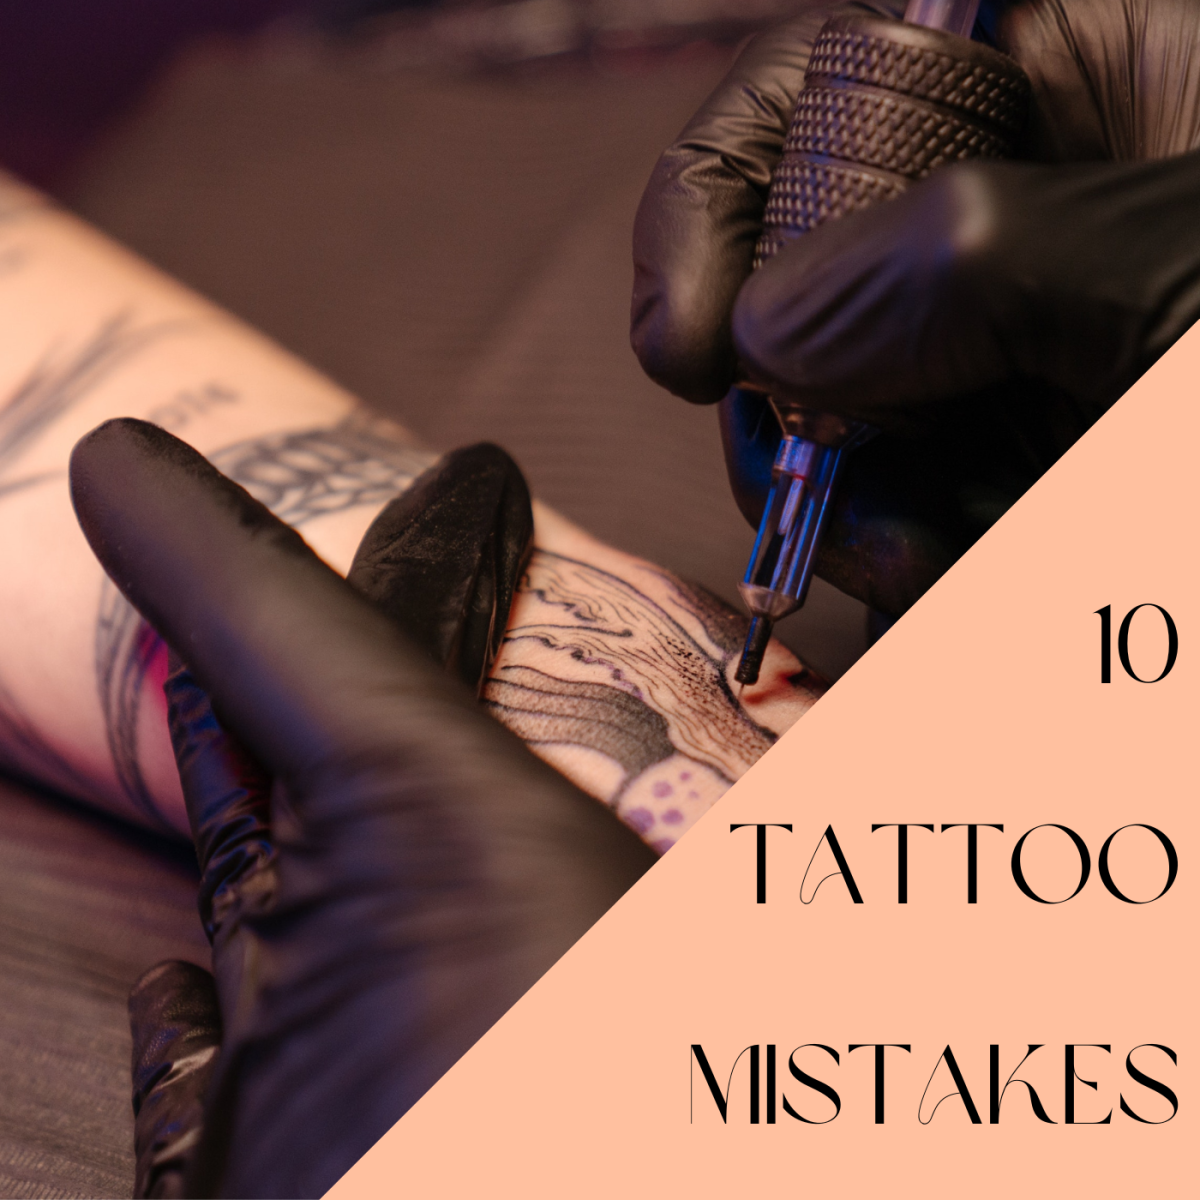 10 Really Bad-Quality Tattoos and Tattooing Mistakes